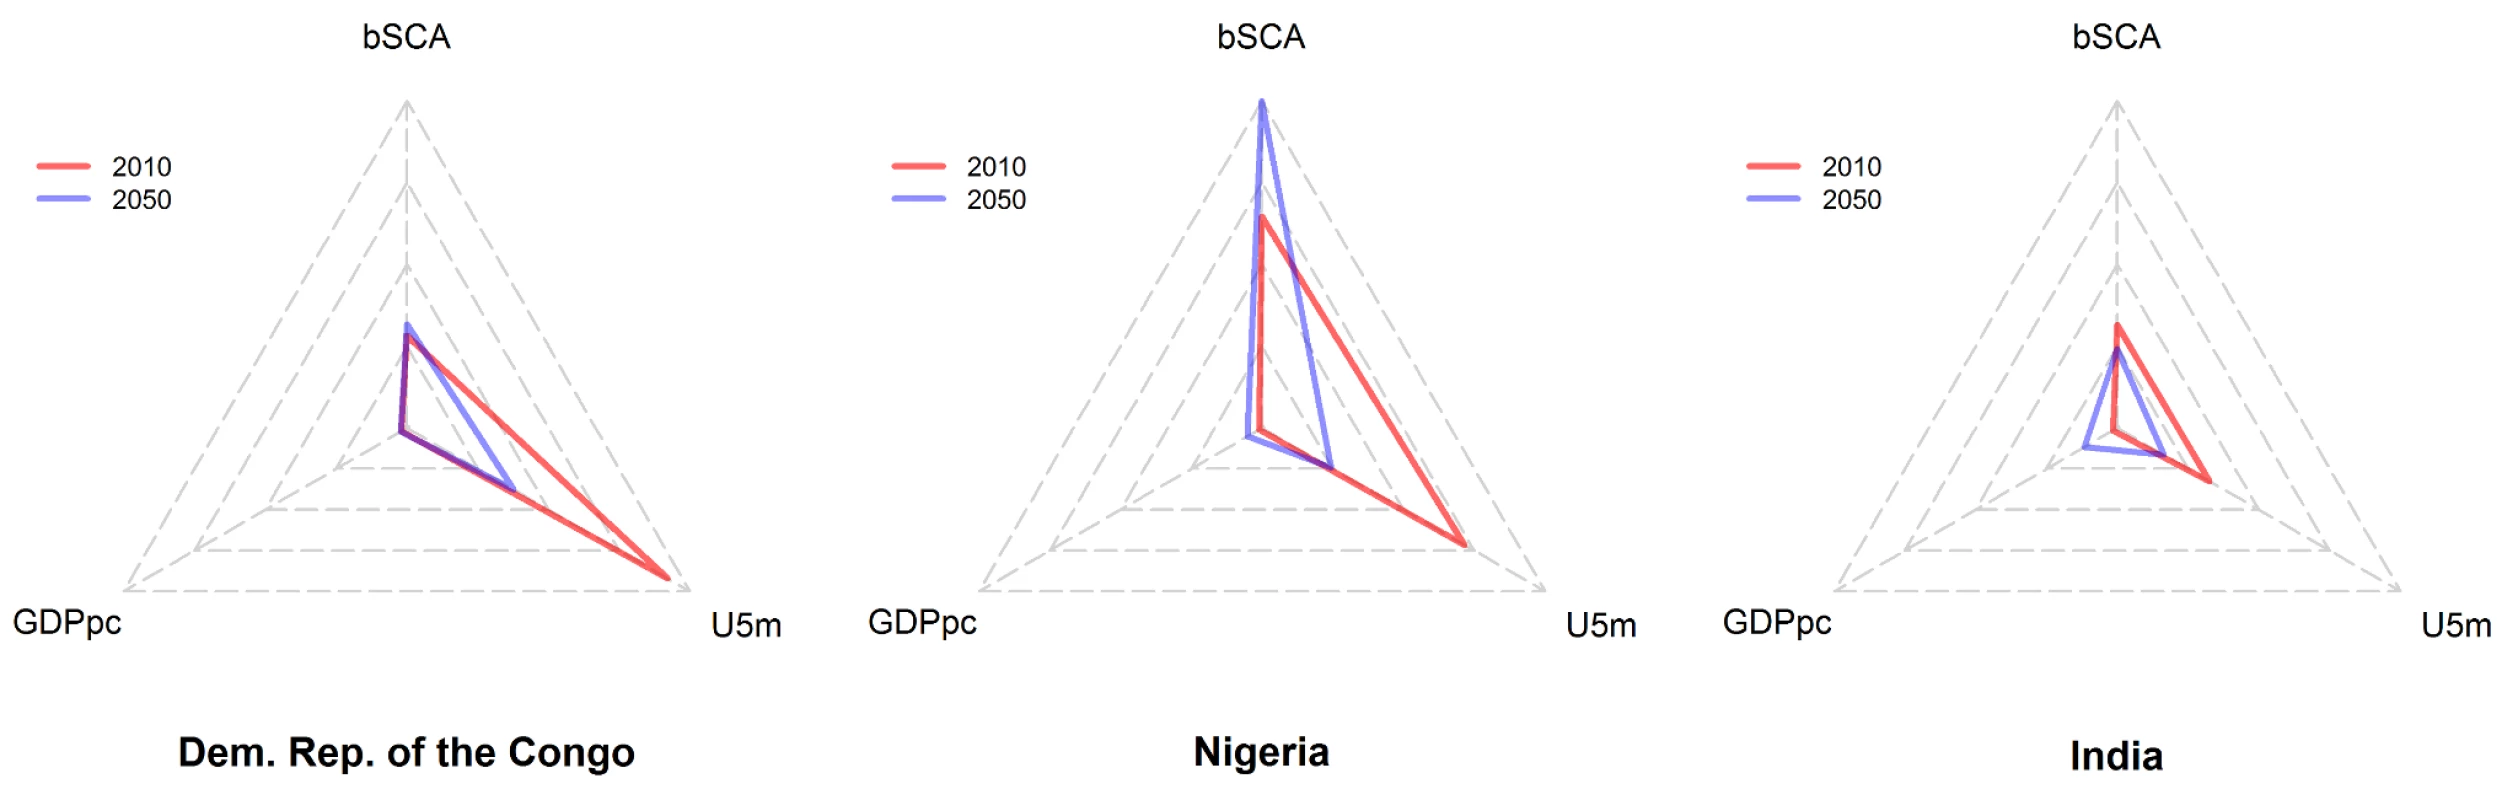 Radar plots of newborns with SCA, gross domestic product, and under-five mortality for the DRC, Nigeria, and India.